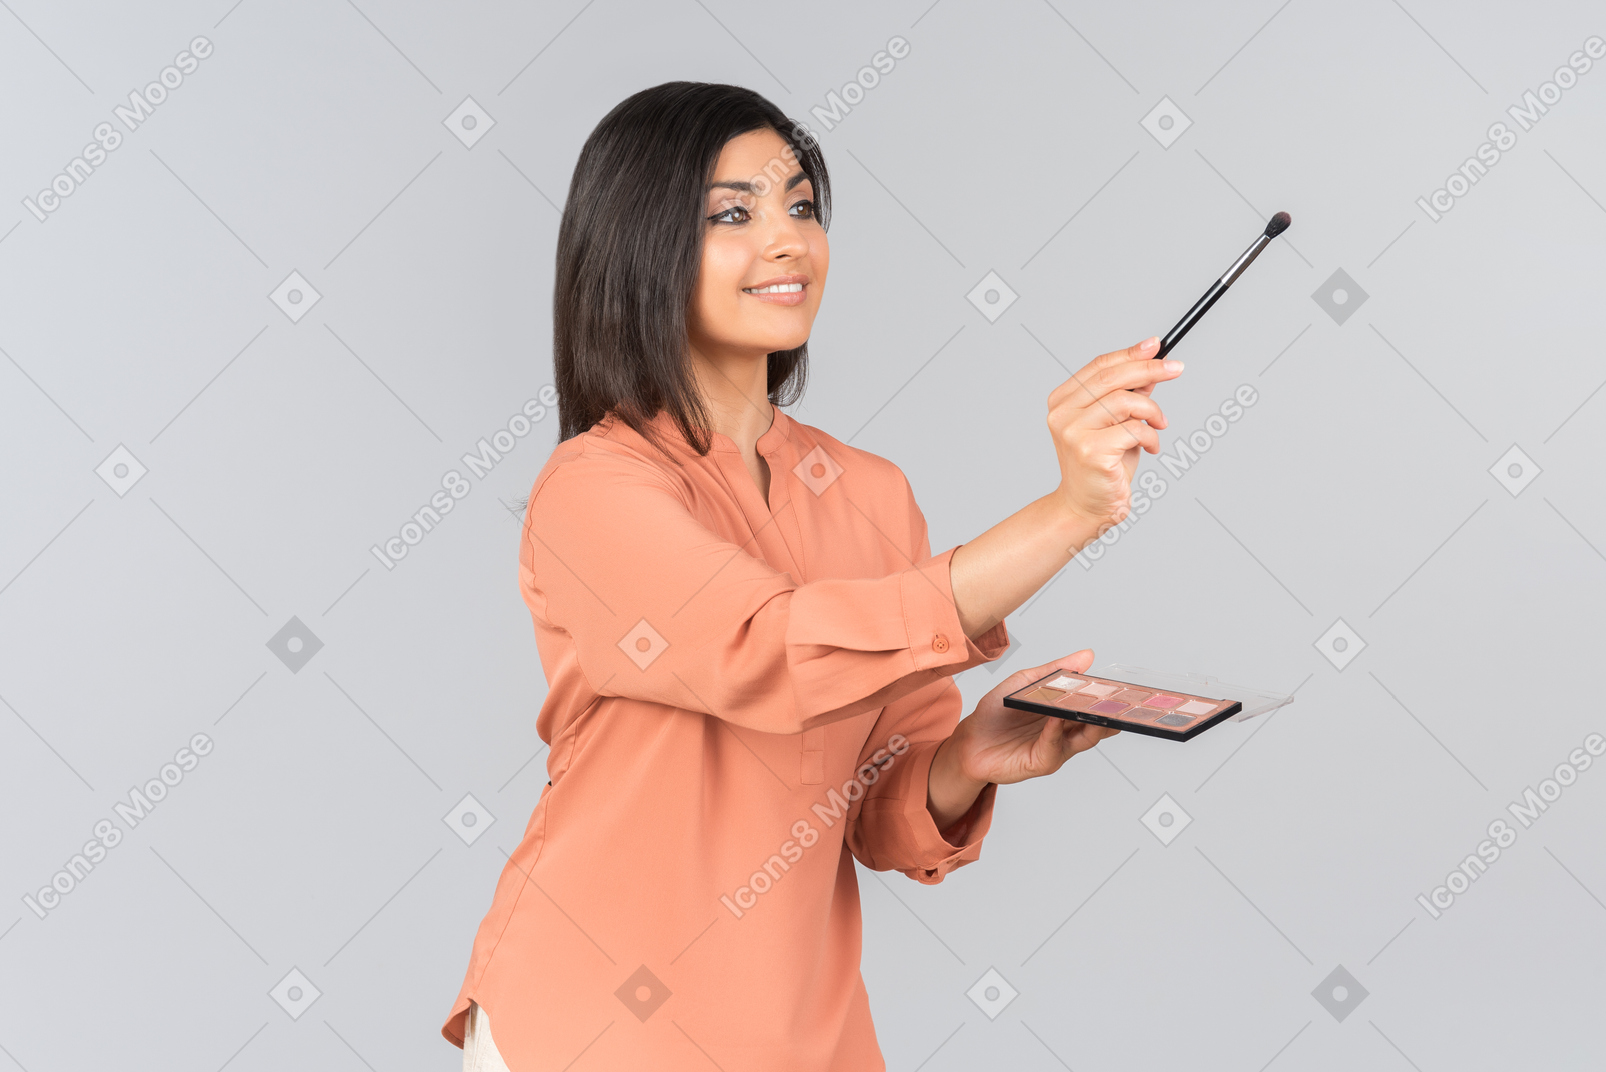 Smiling indian girl standing half sideways and holding eye brush and eyeshadow palette